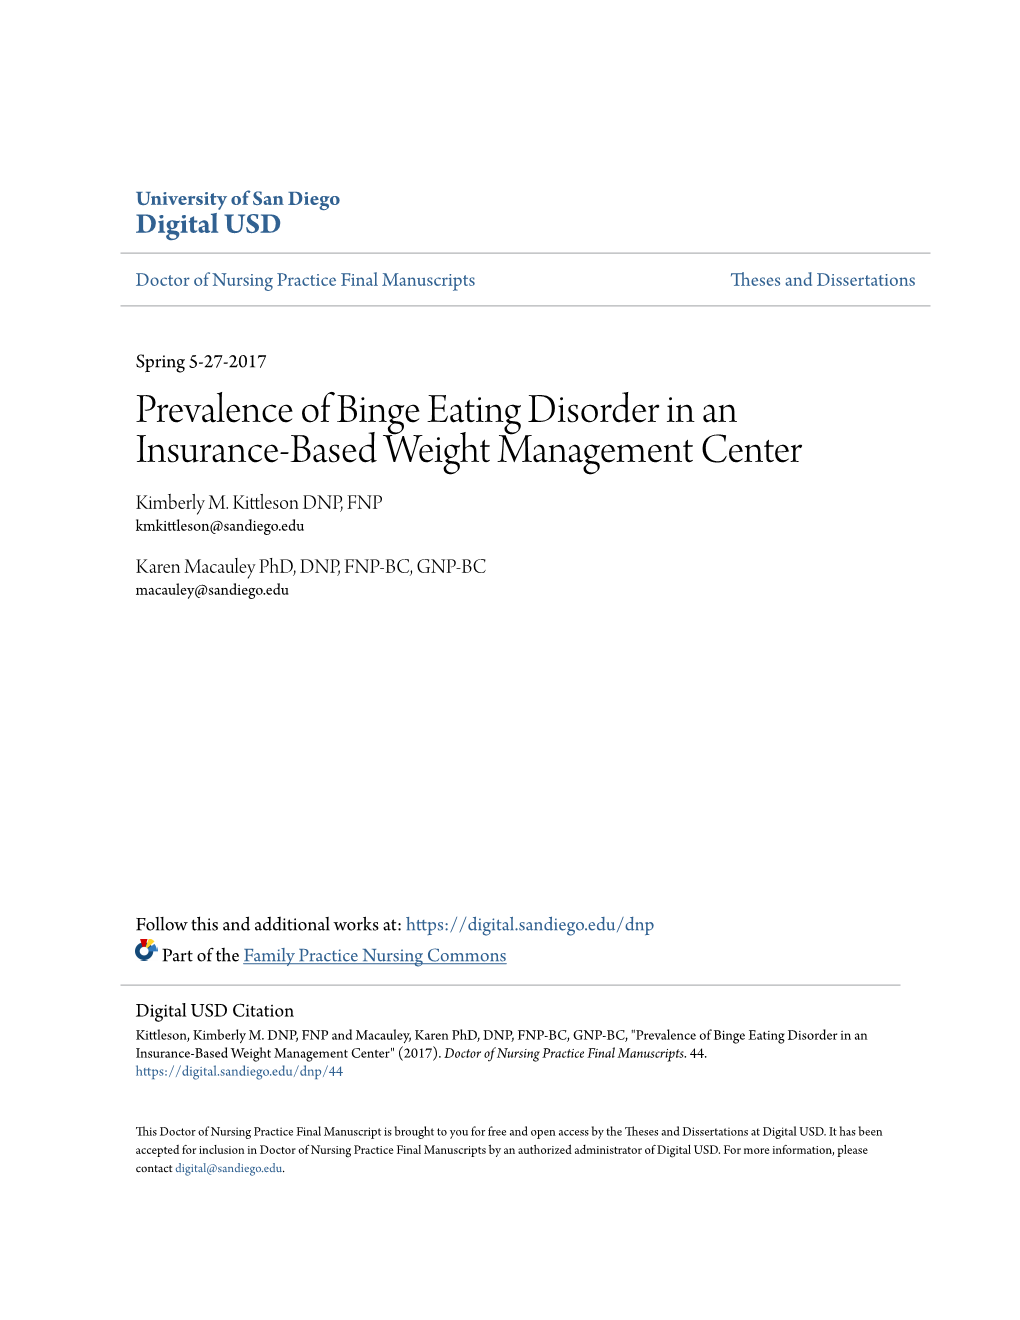 Prevalence of Binge Eating Disorder in an Insurance-Based Weight Management Center Kimberly M